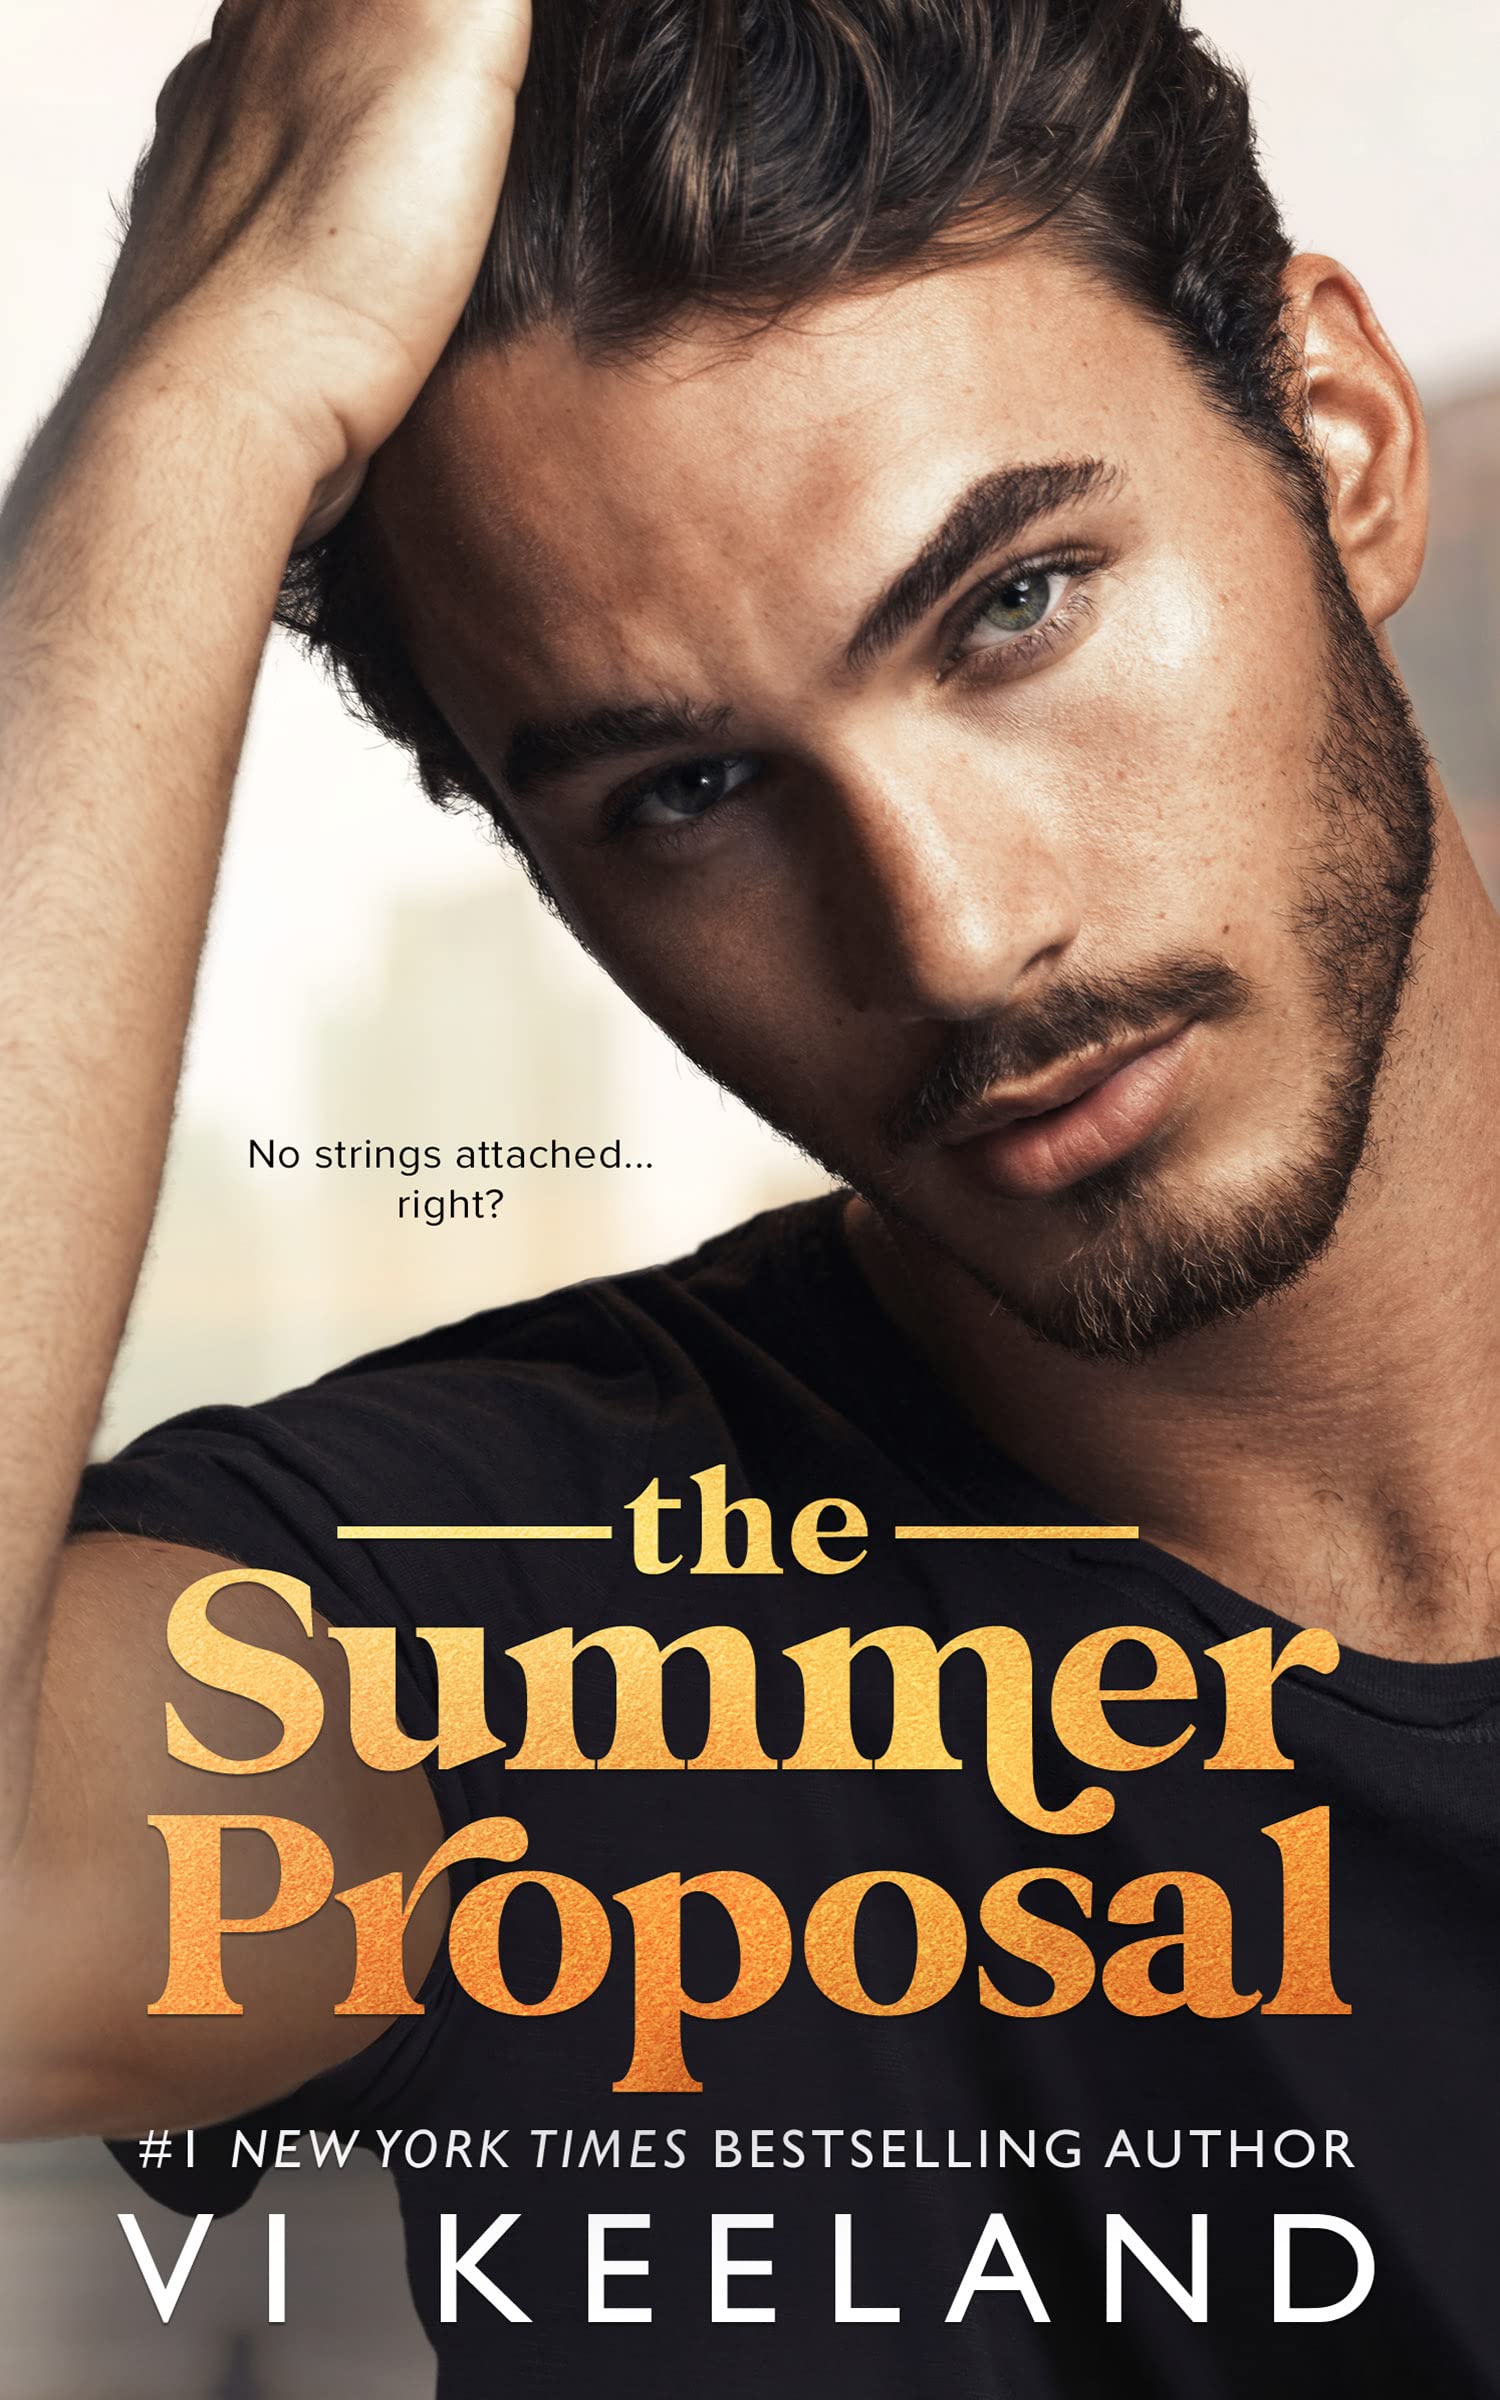 The Summer Proposal books